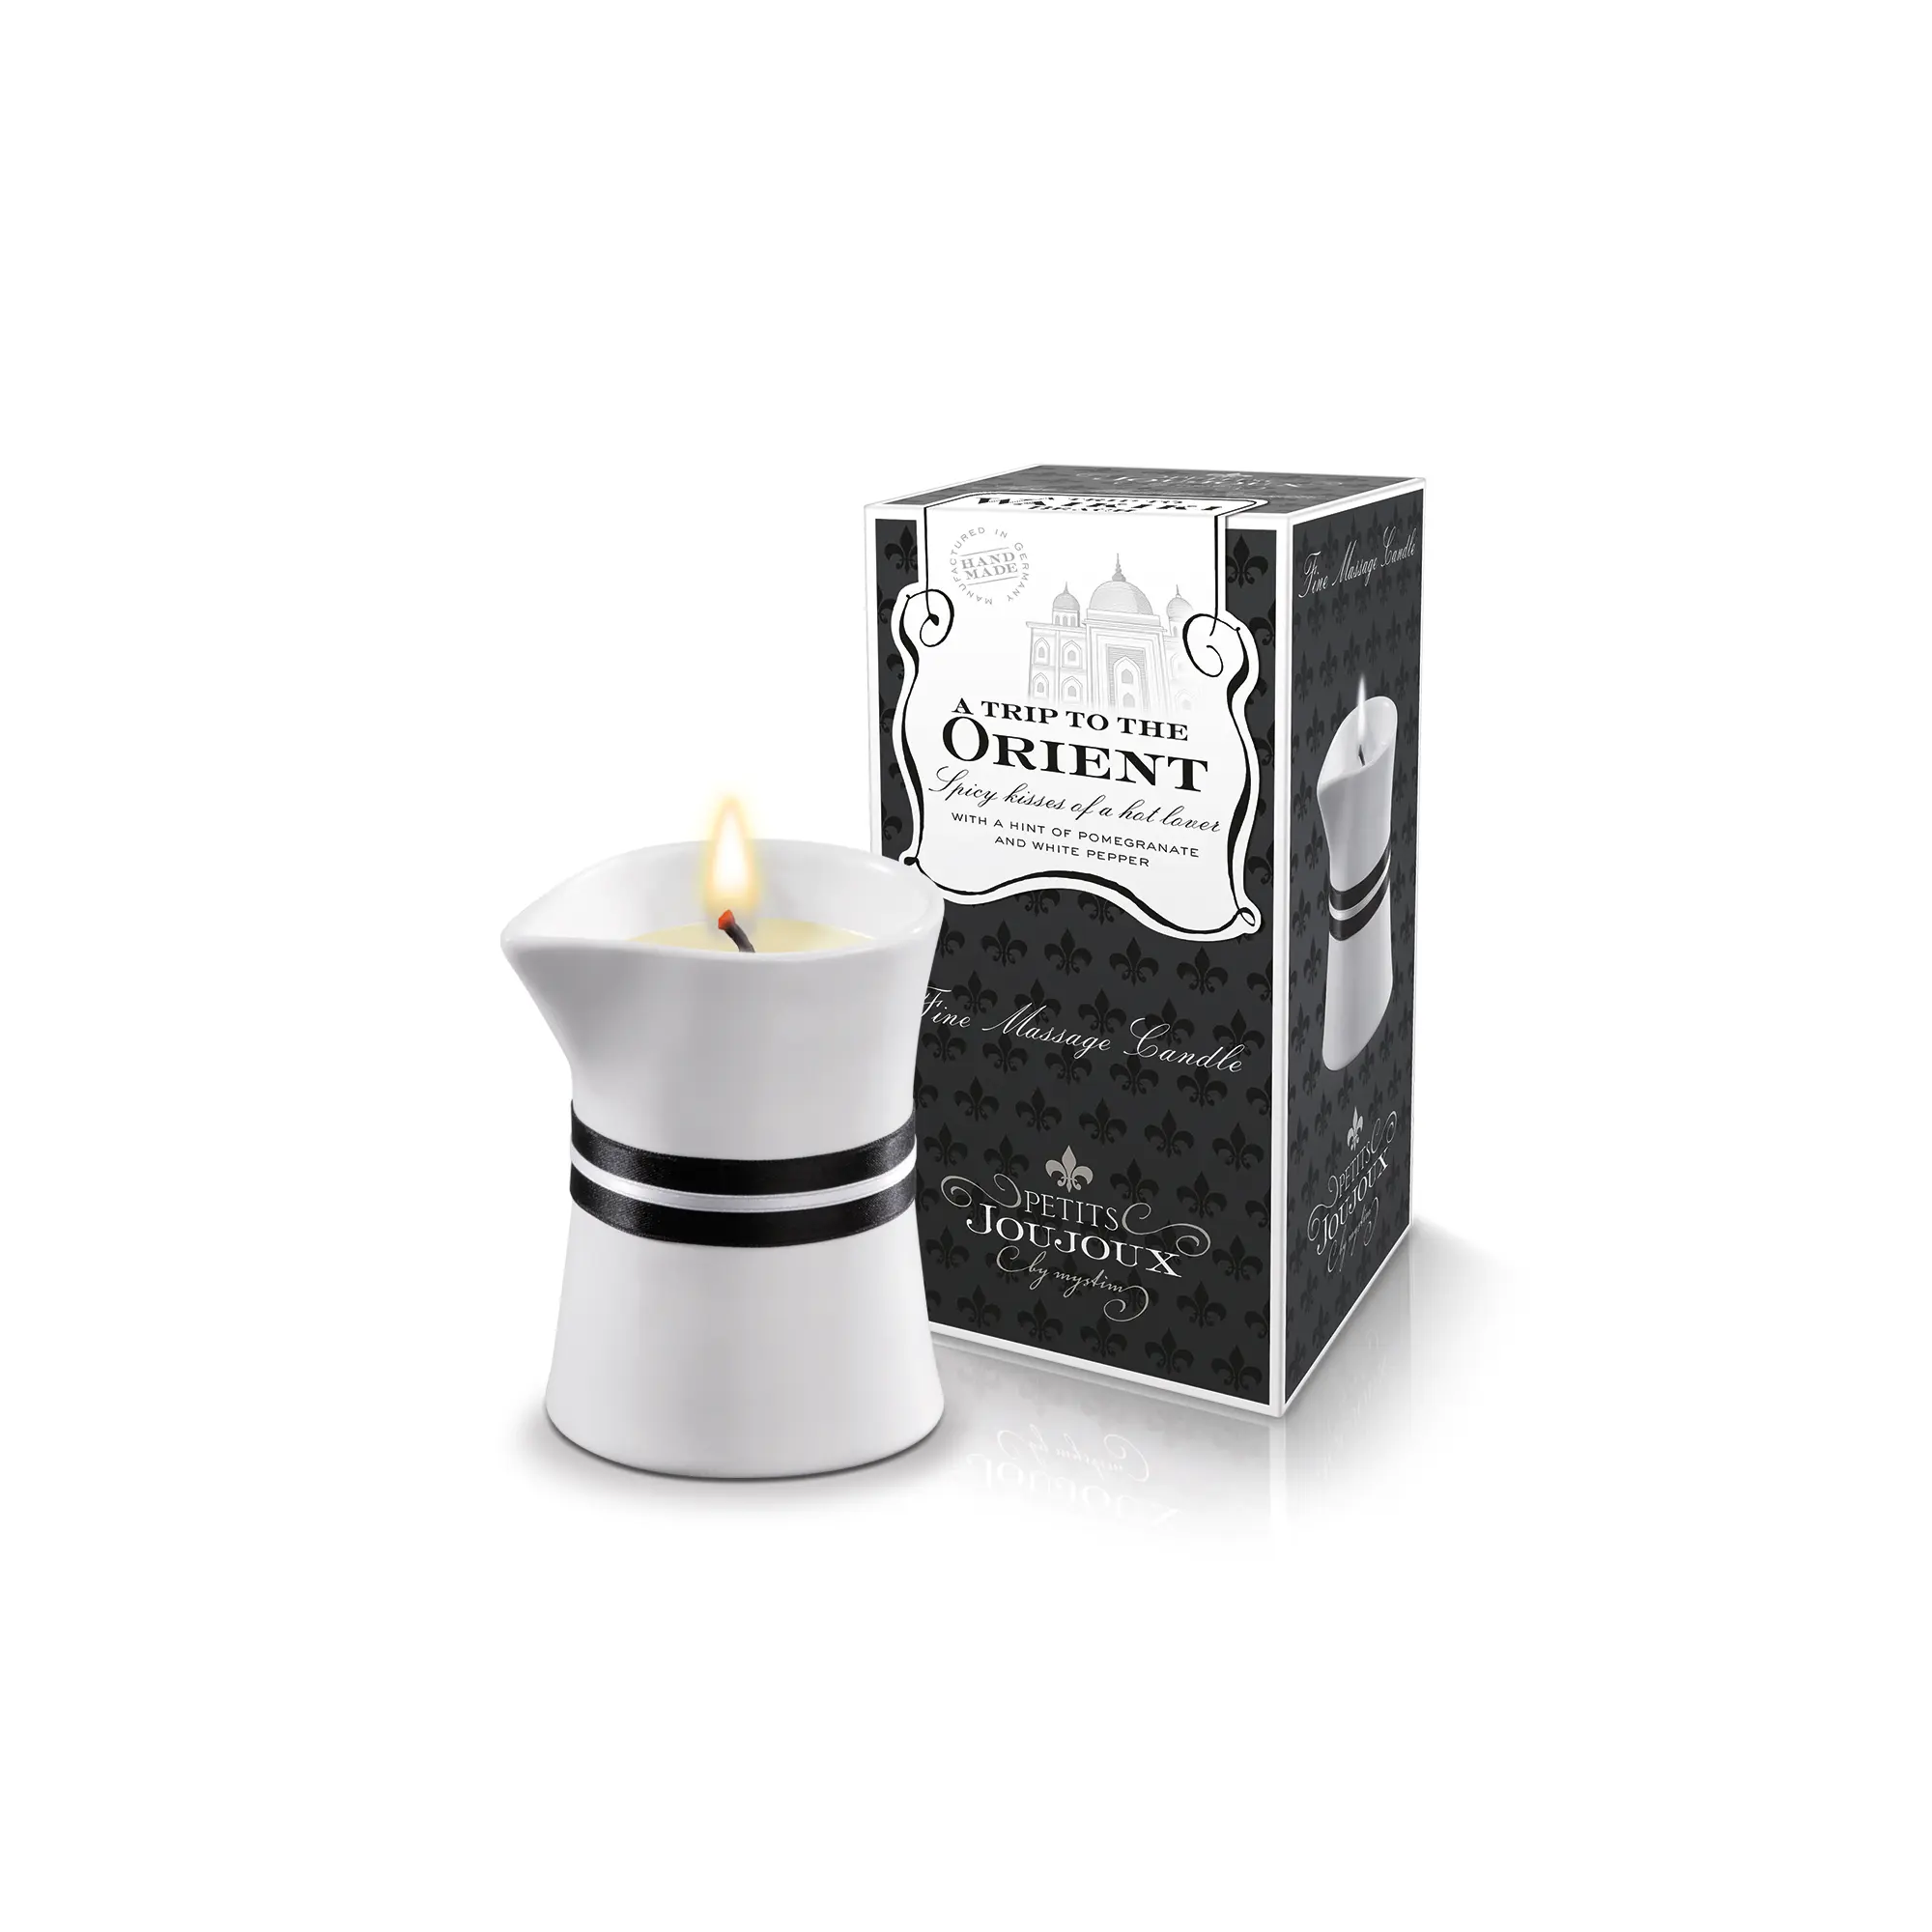 A trip to the Orient - Candle 4.23 oz